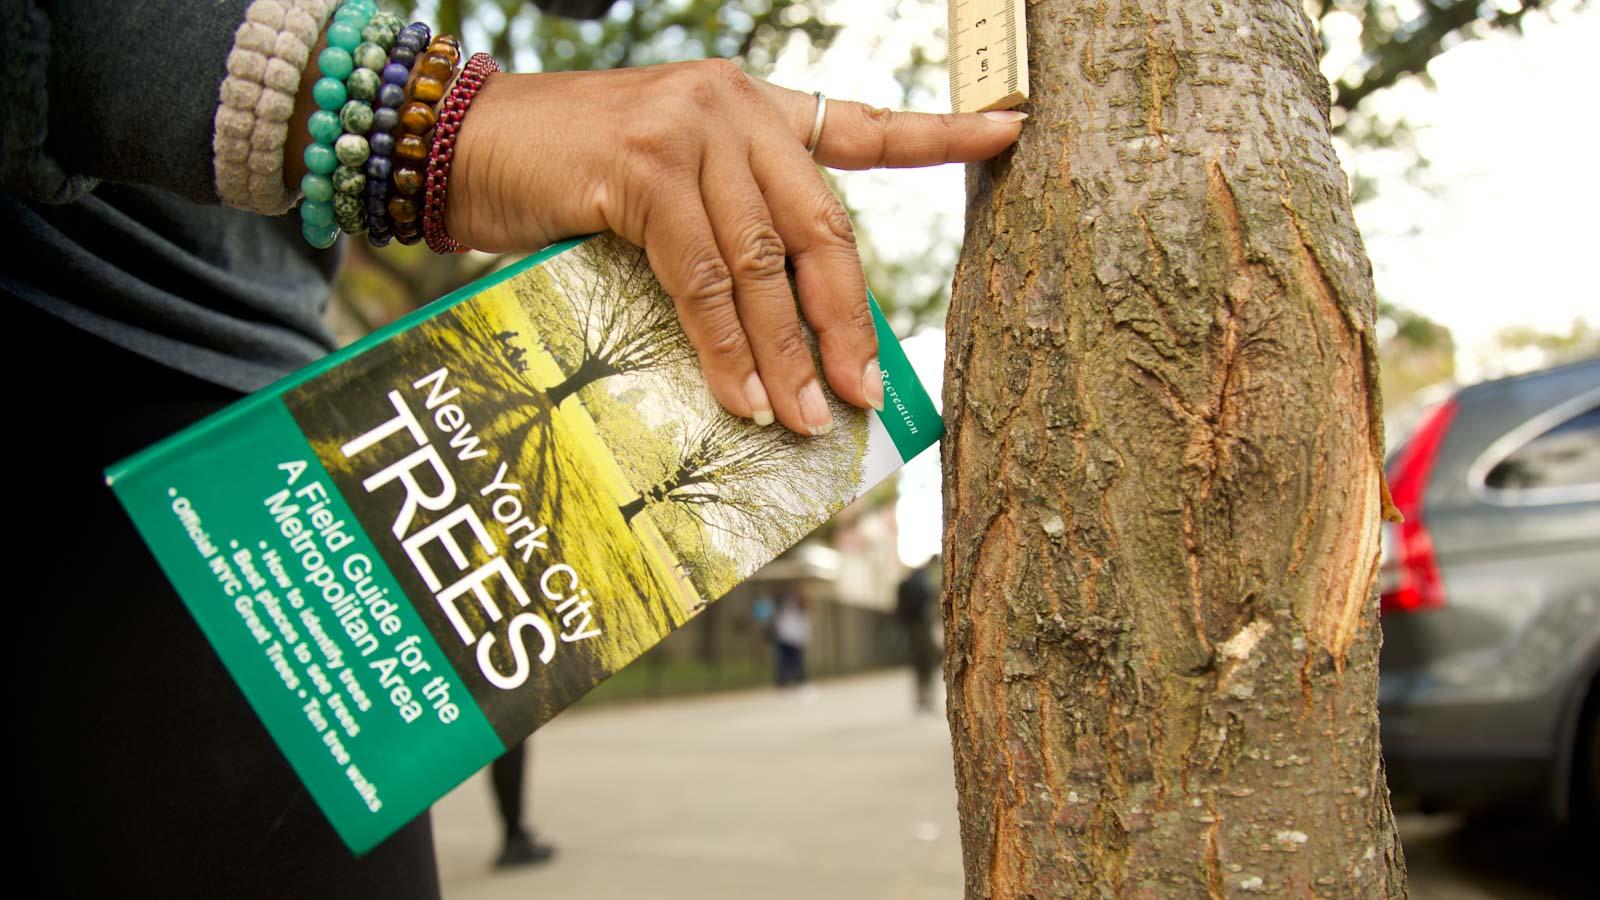 A hand holding a book called "New York City Trees" points to a tree trunk